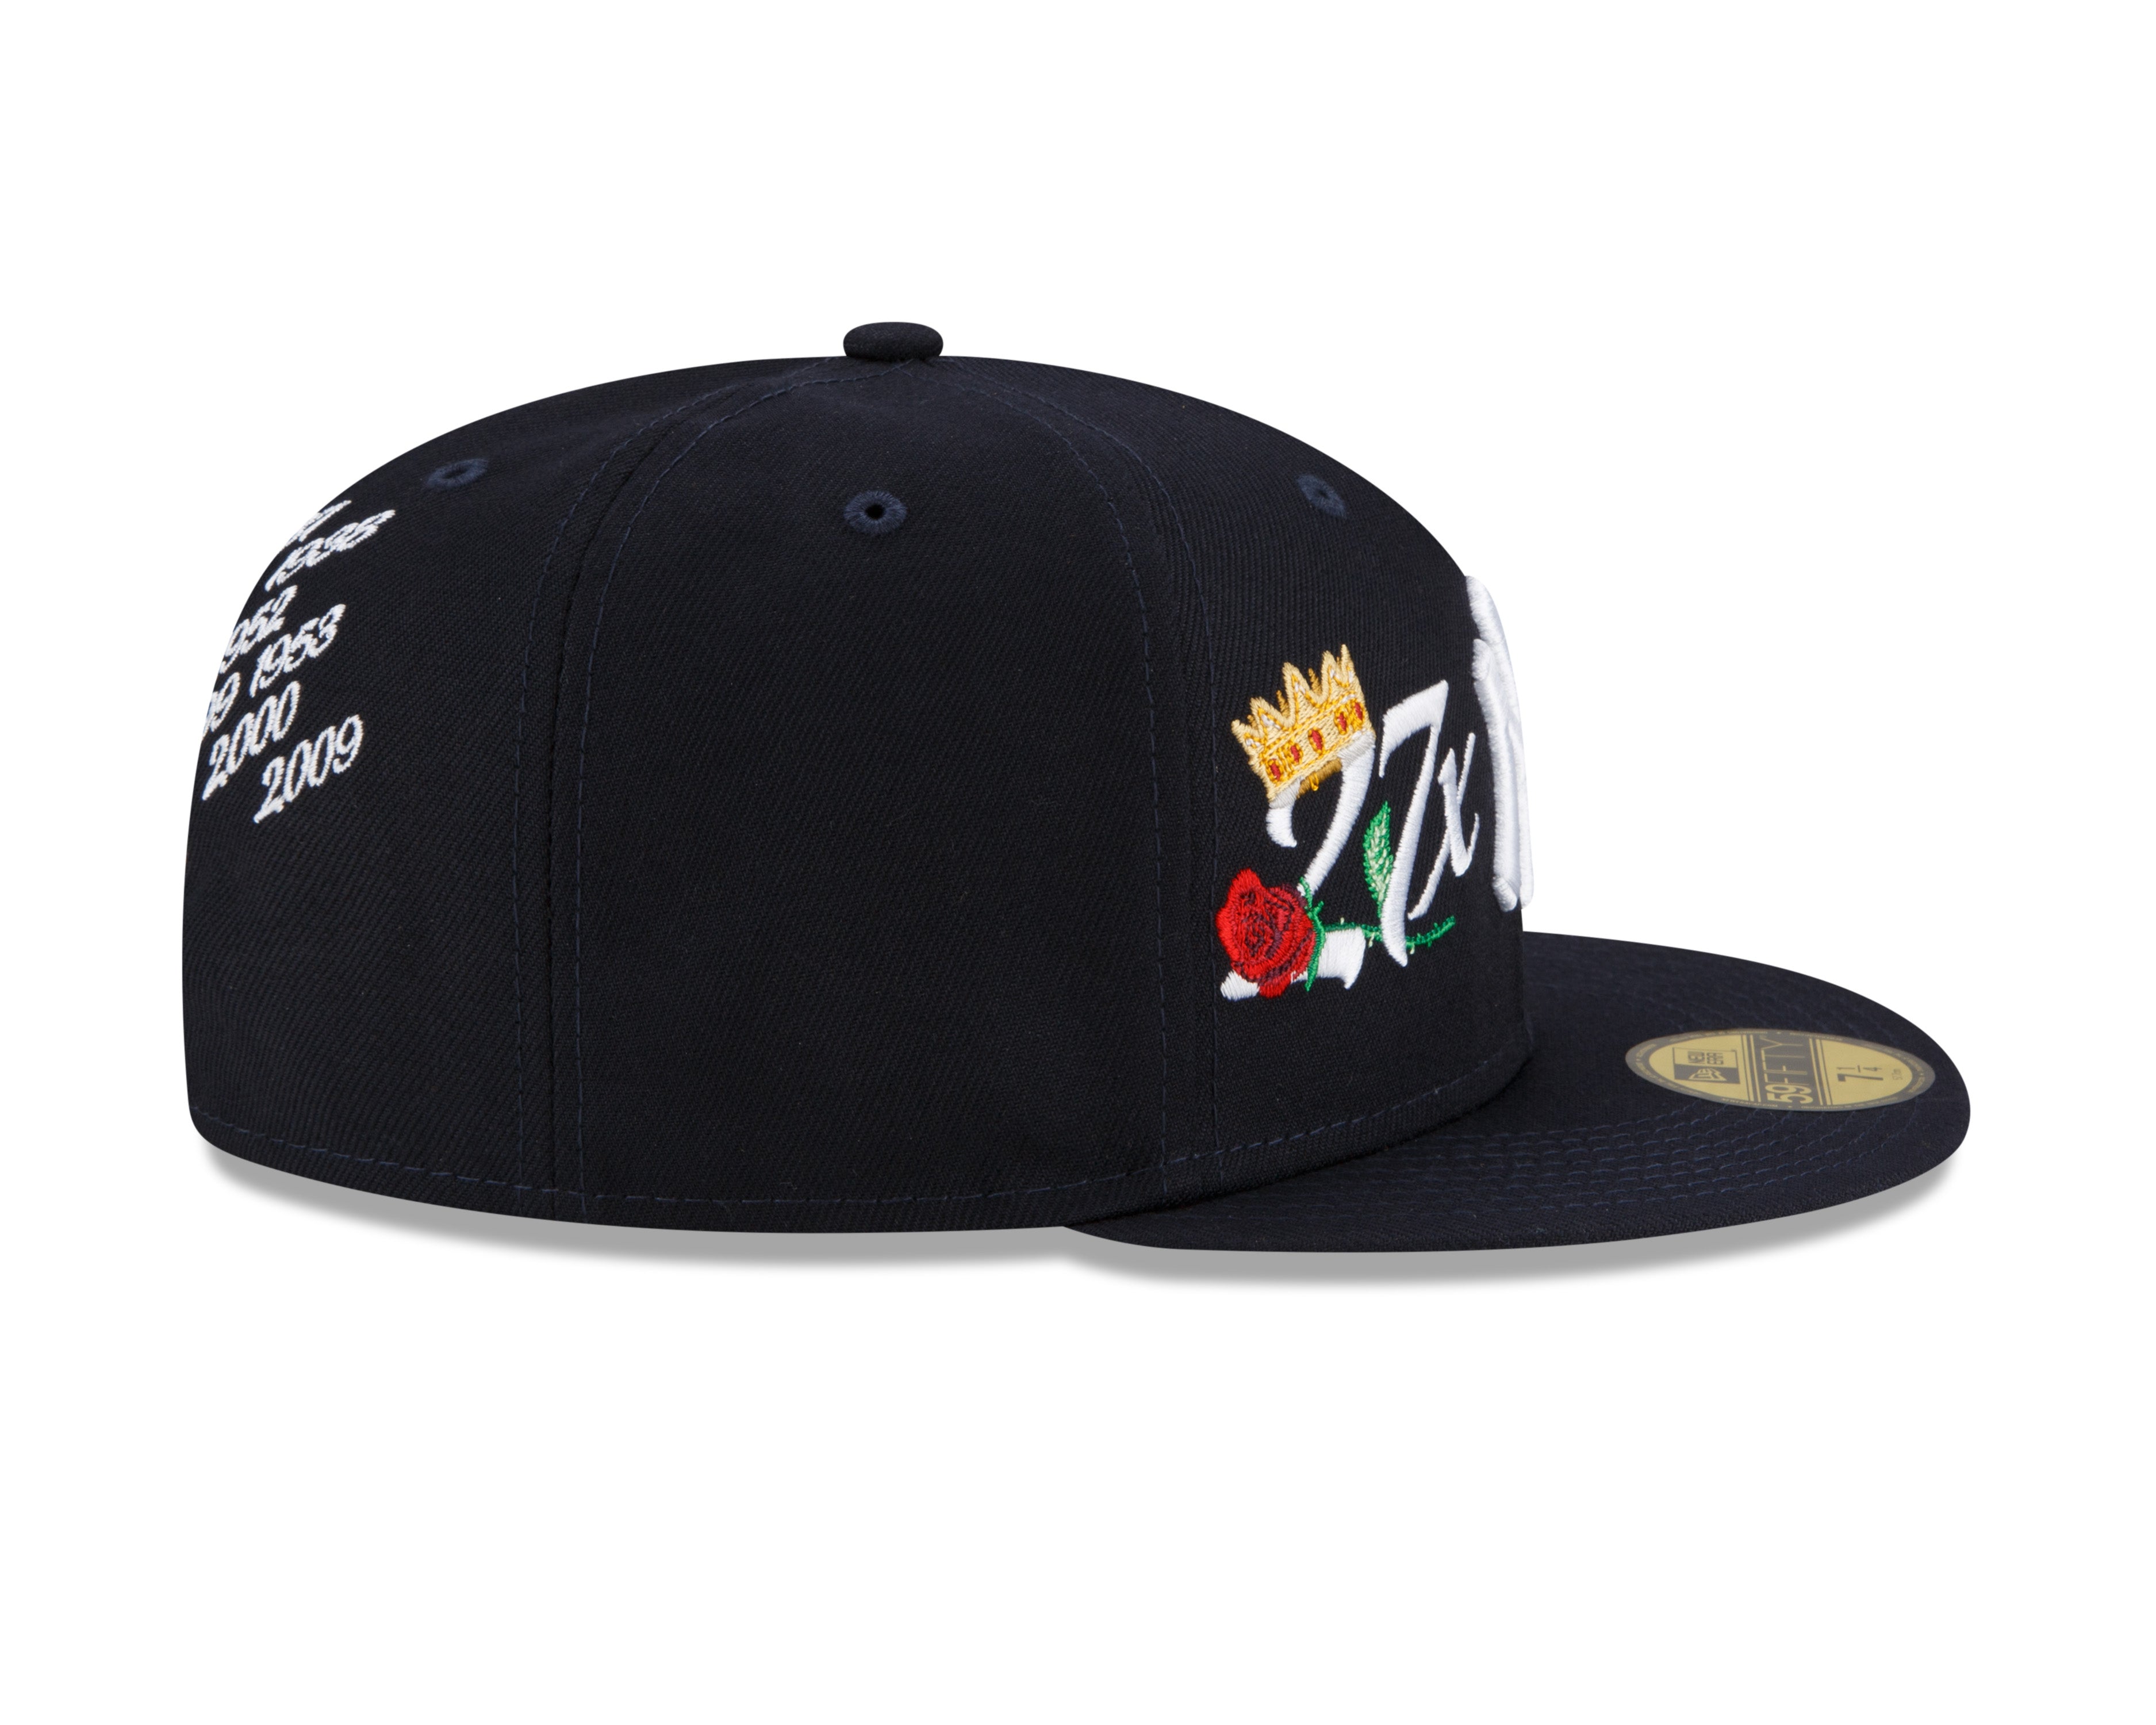 New York Yankees CROWN CHAMPS 59Fifty Fitted Cap - OTC - Headz Up 